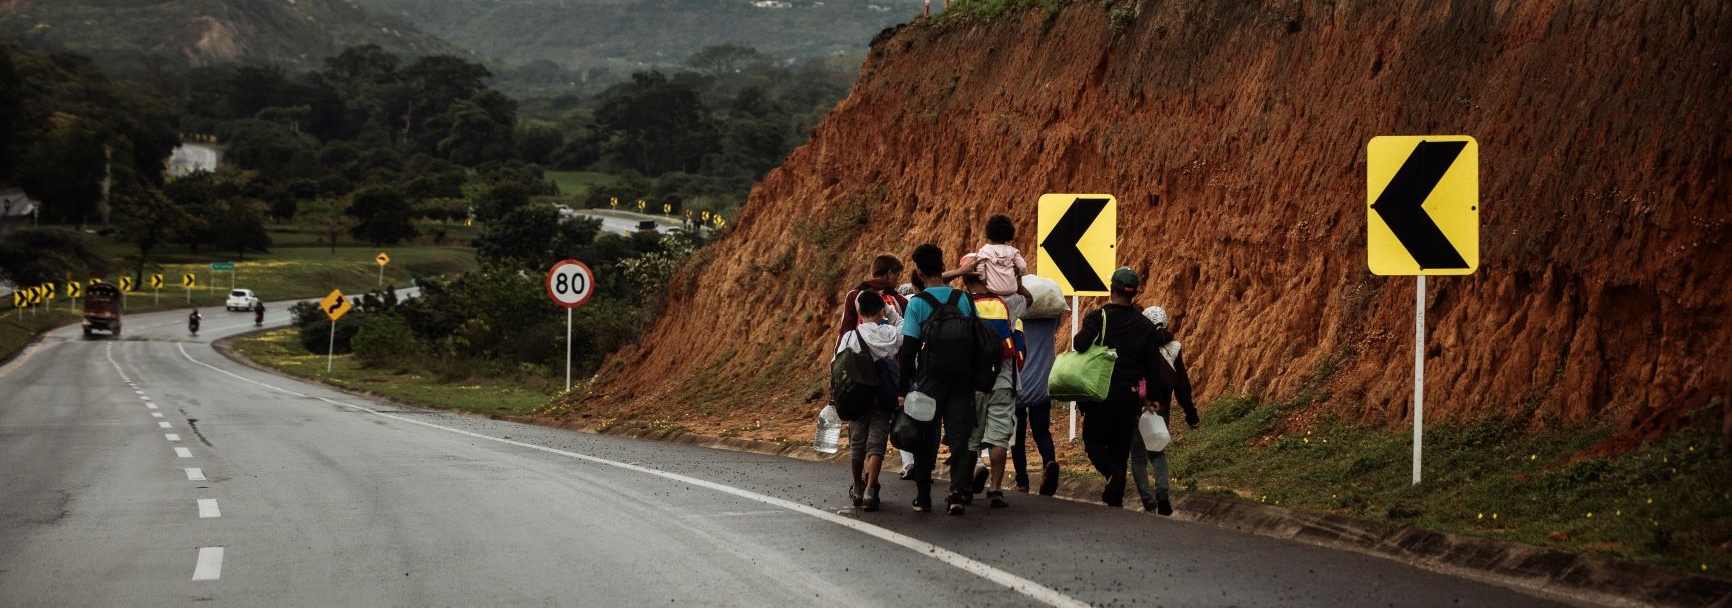 Venezuelans walk along the side of the road from the Colombian border town of Cucuta toward Pamplona, one of the first major cities along the migration route to the capital, Bogota